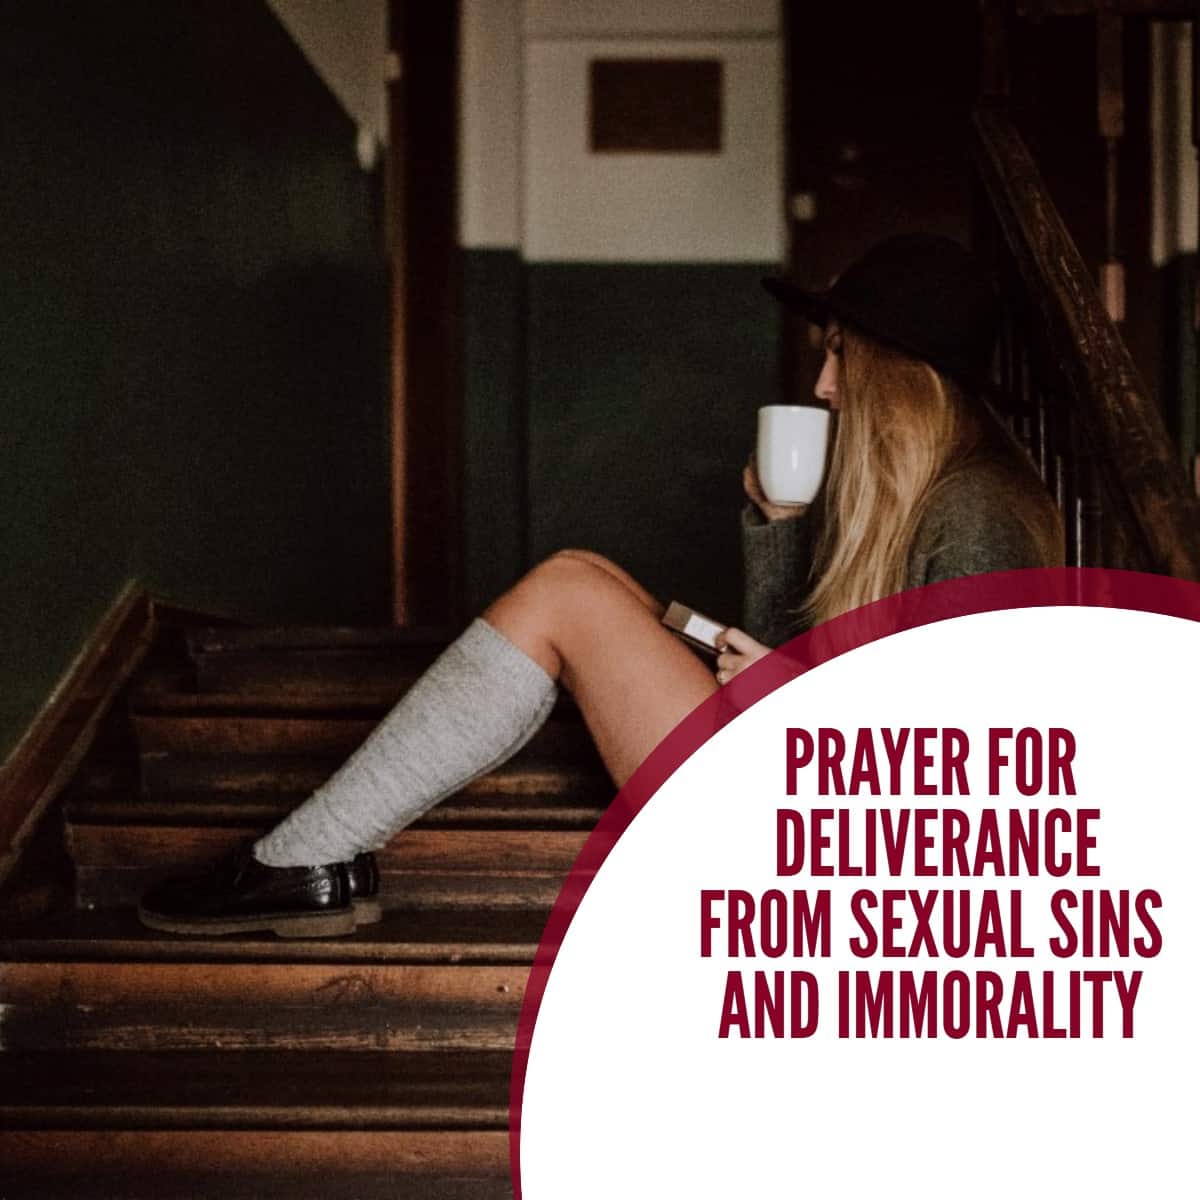 Prayer for Deliverance from sexual sins and immorality